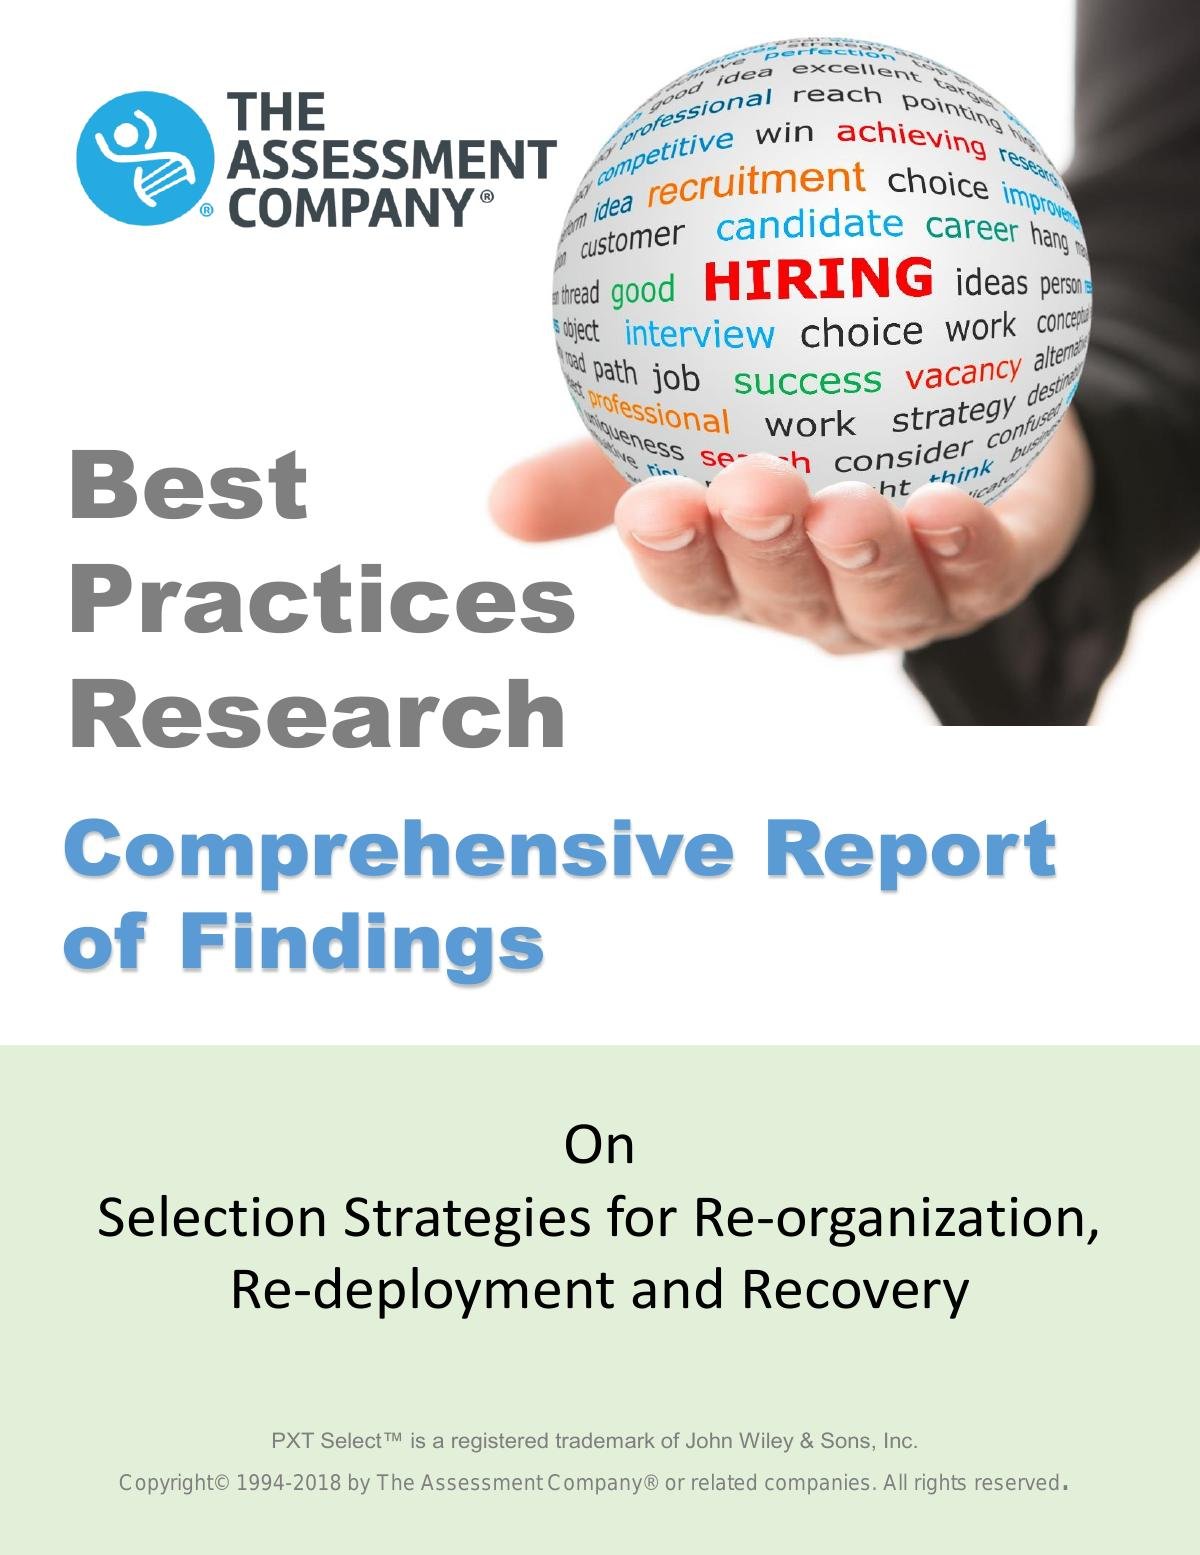 Selection Strategies for Re-organization, Re-deployment and Recovery